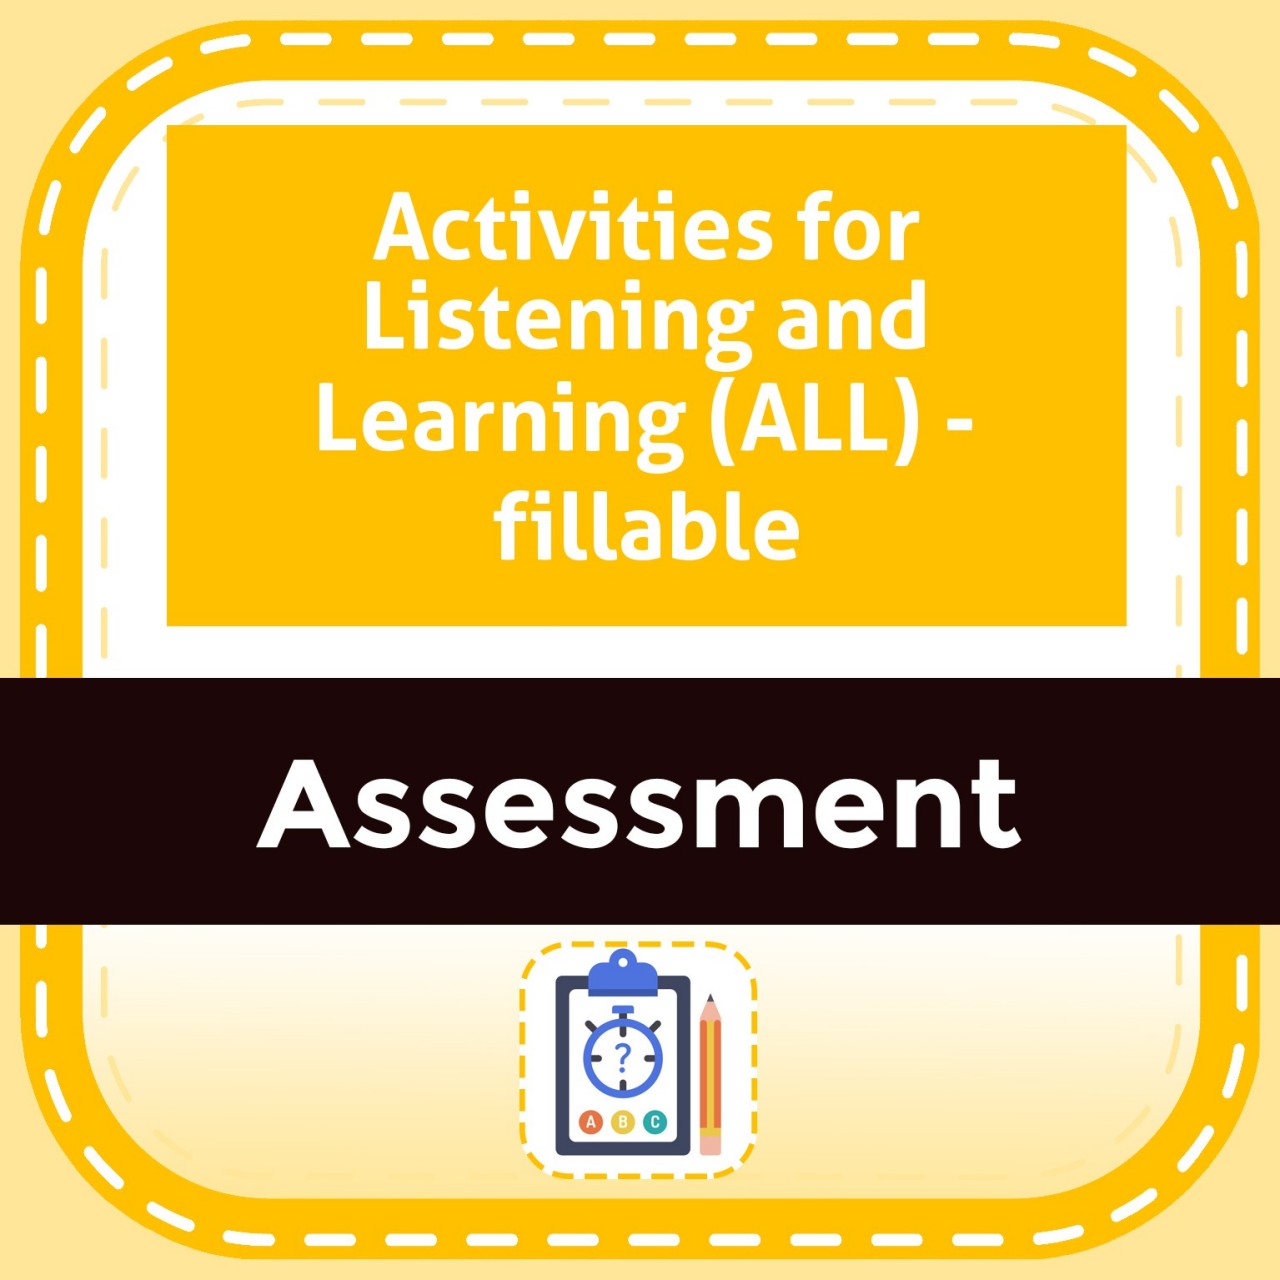 Activities for Listening and Learning (ALL) - fillable